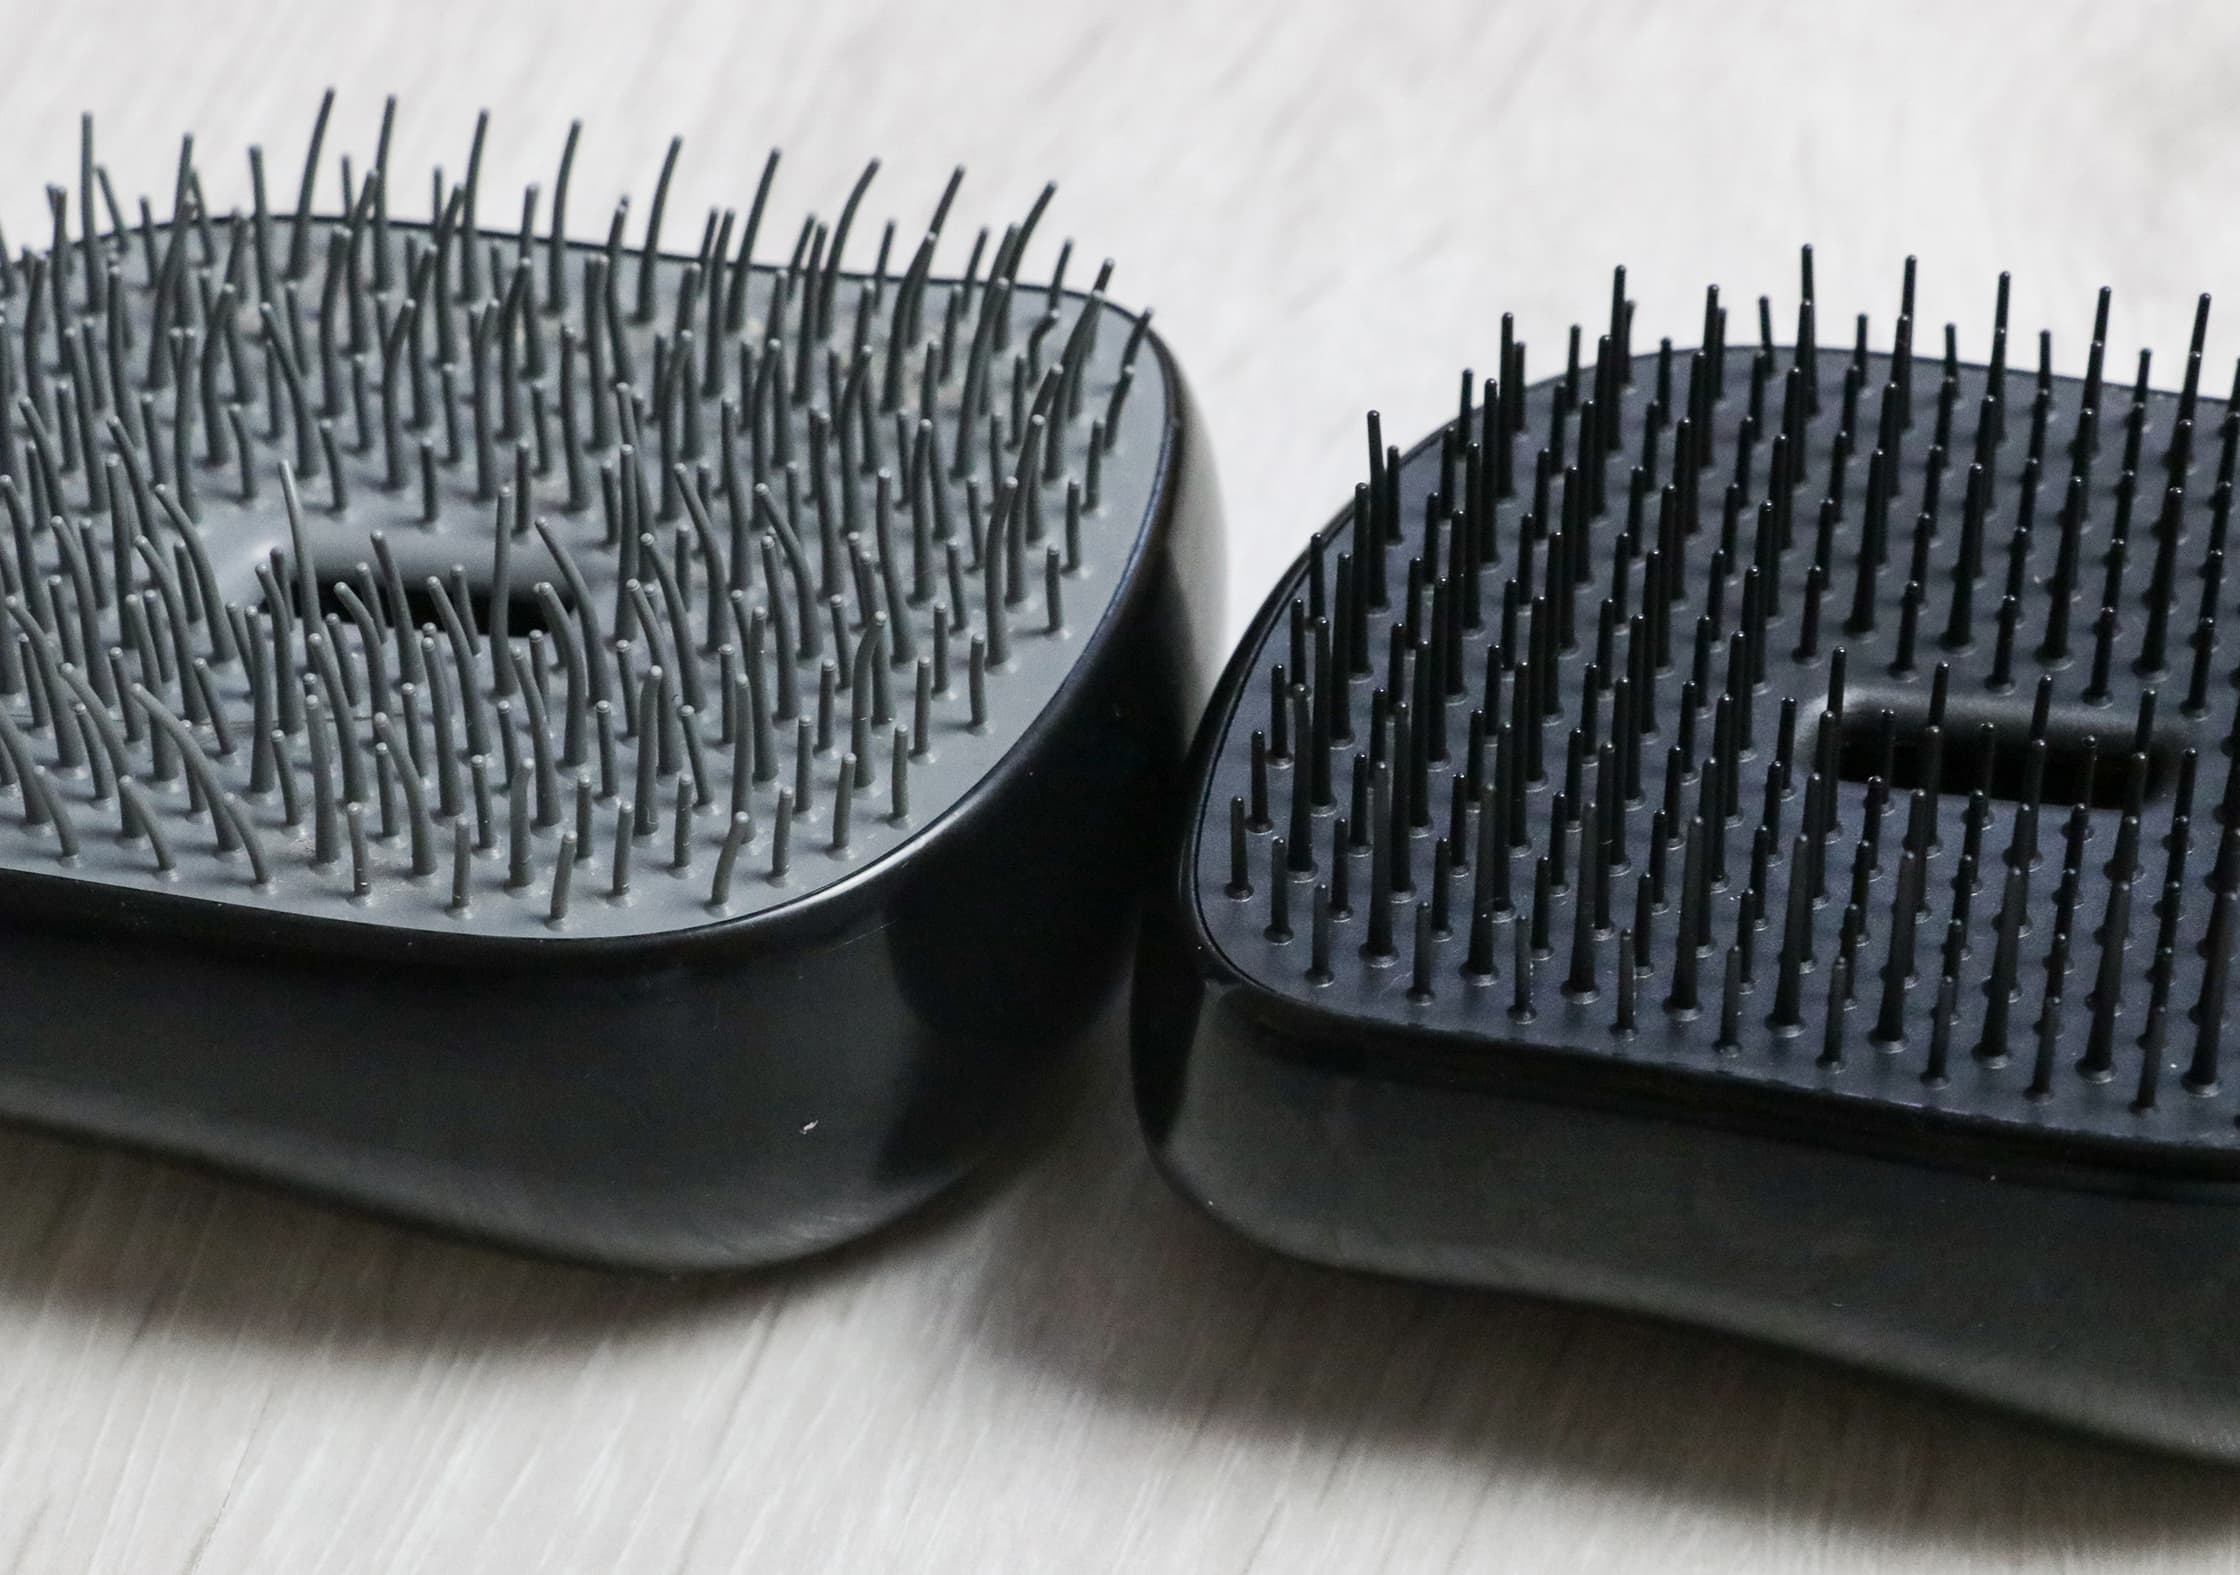 Three Year Old Teeth On The Left And New Tangle Teezer Compact Styler On The Right